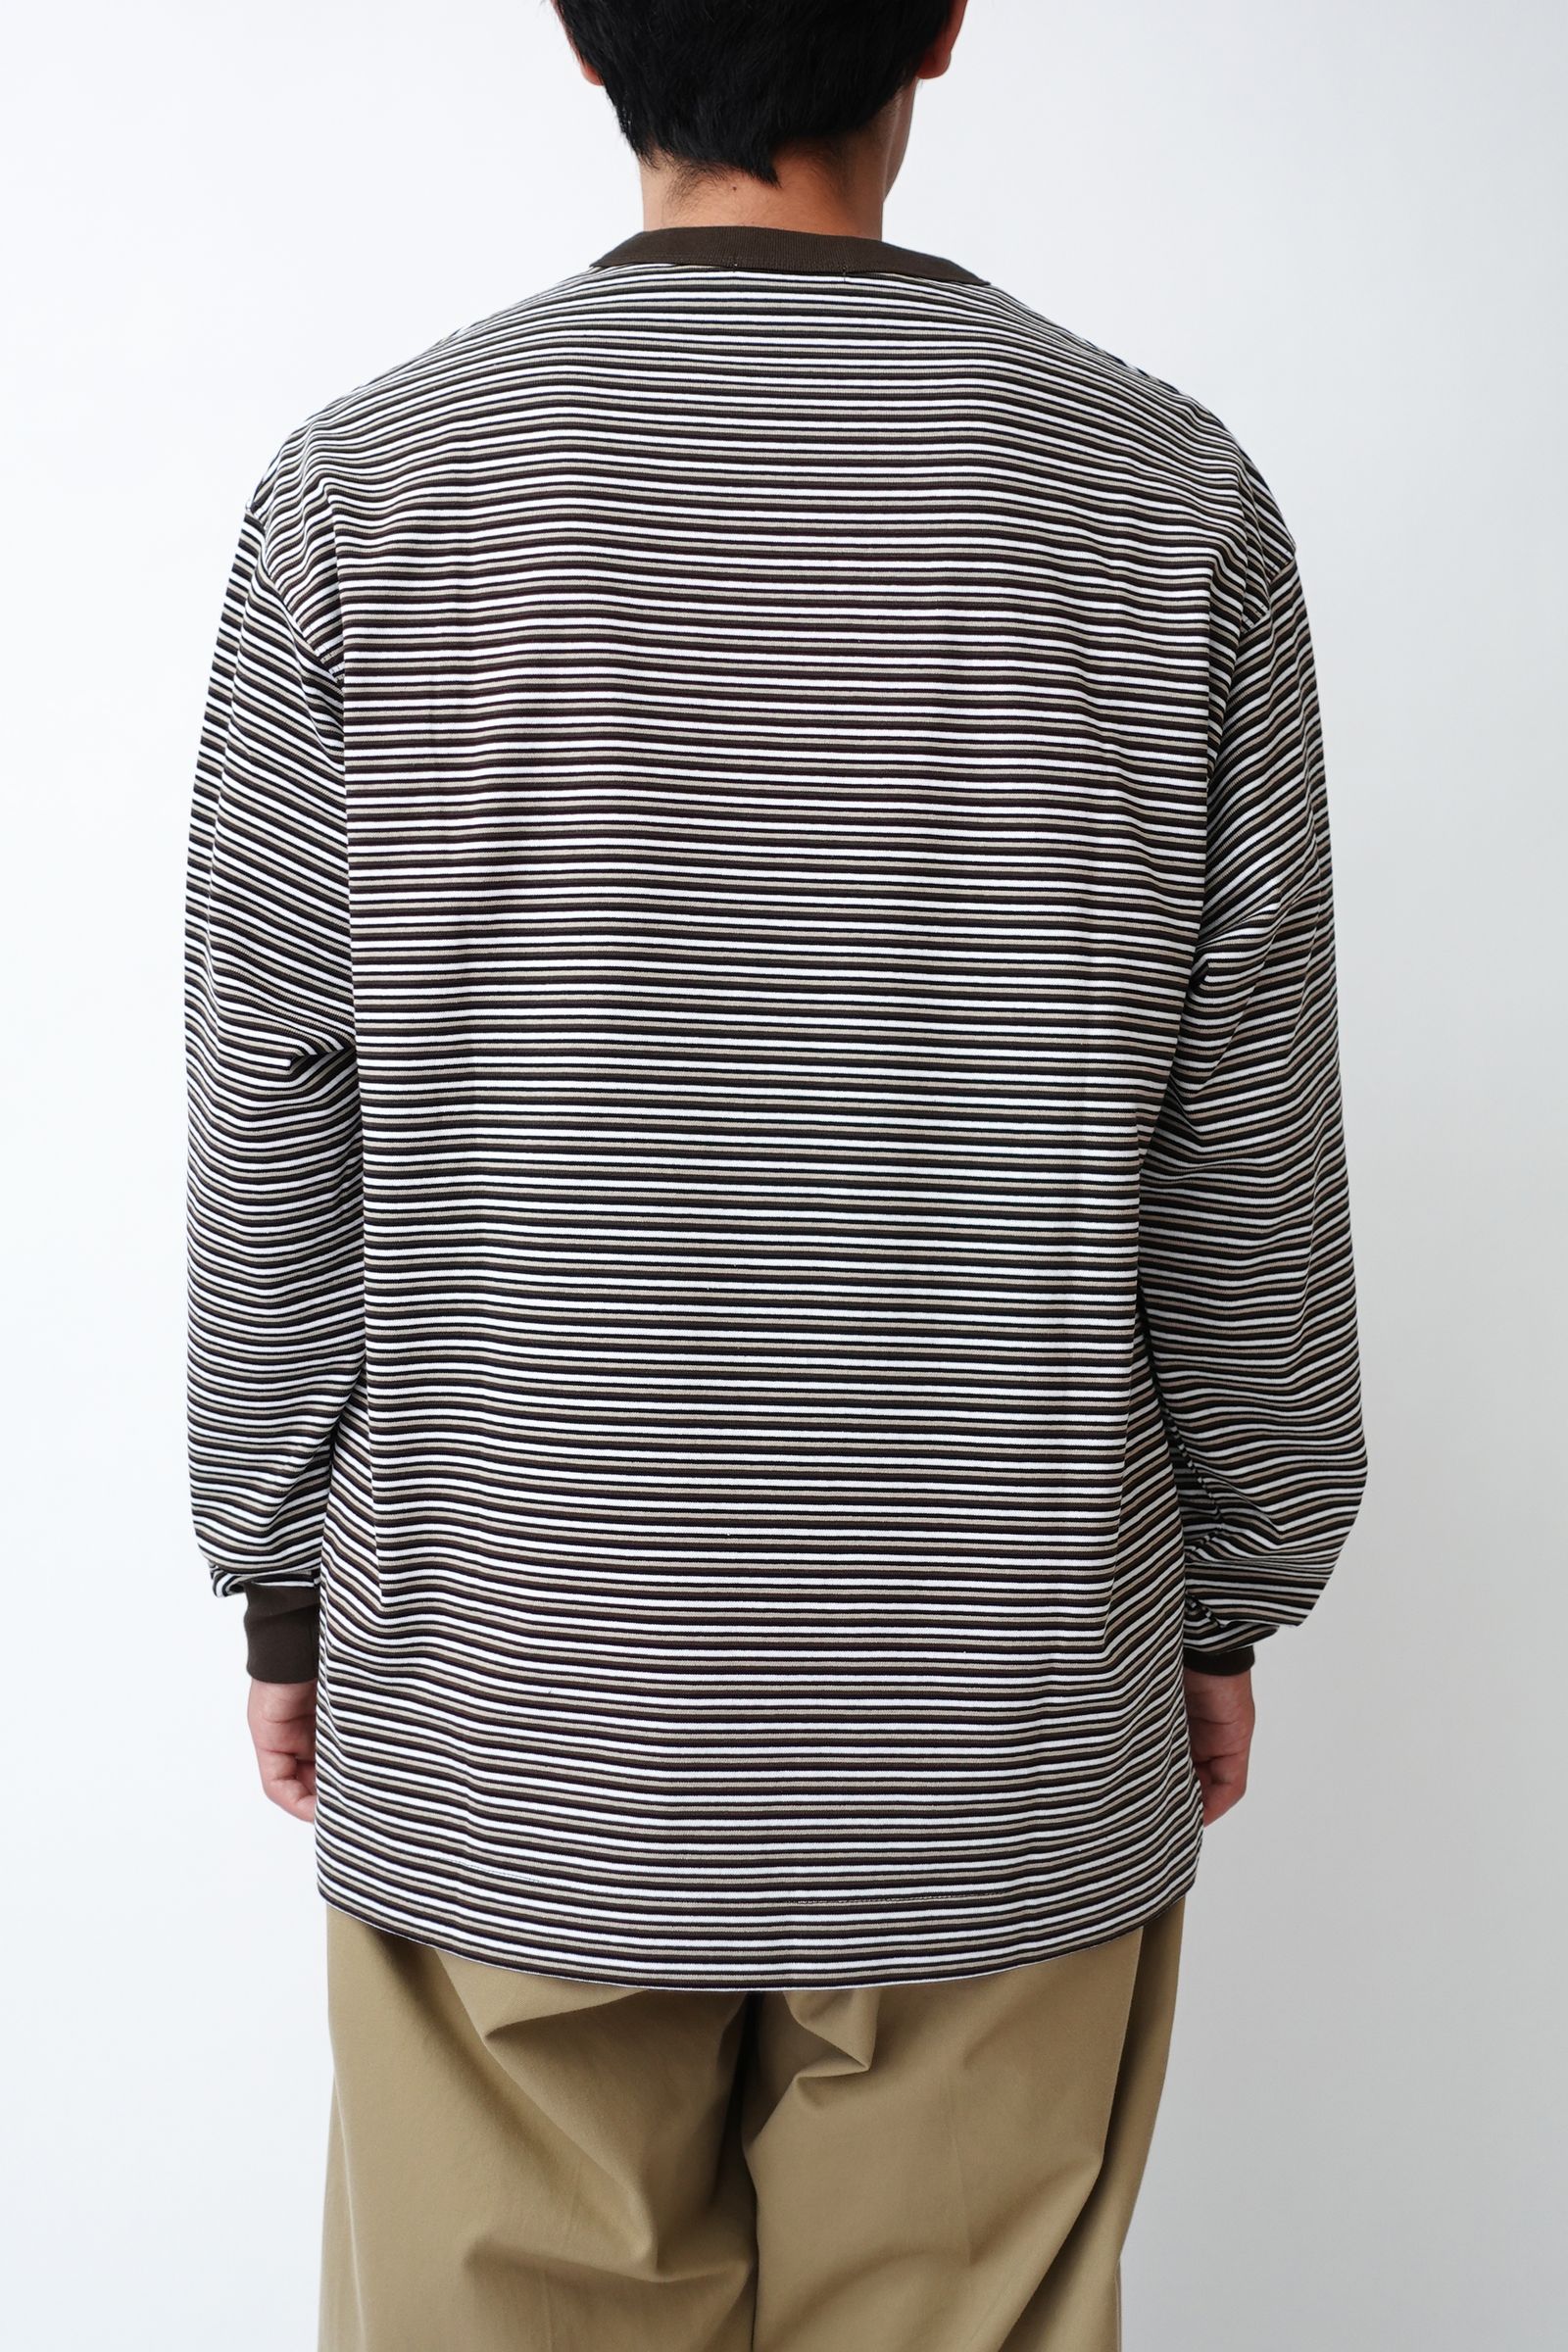 UNIVERSAL PRODUCTS - MULTI BORDER L/S T-SHIRT BROWN ...